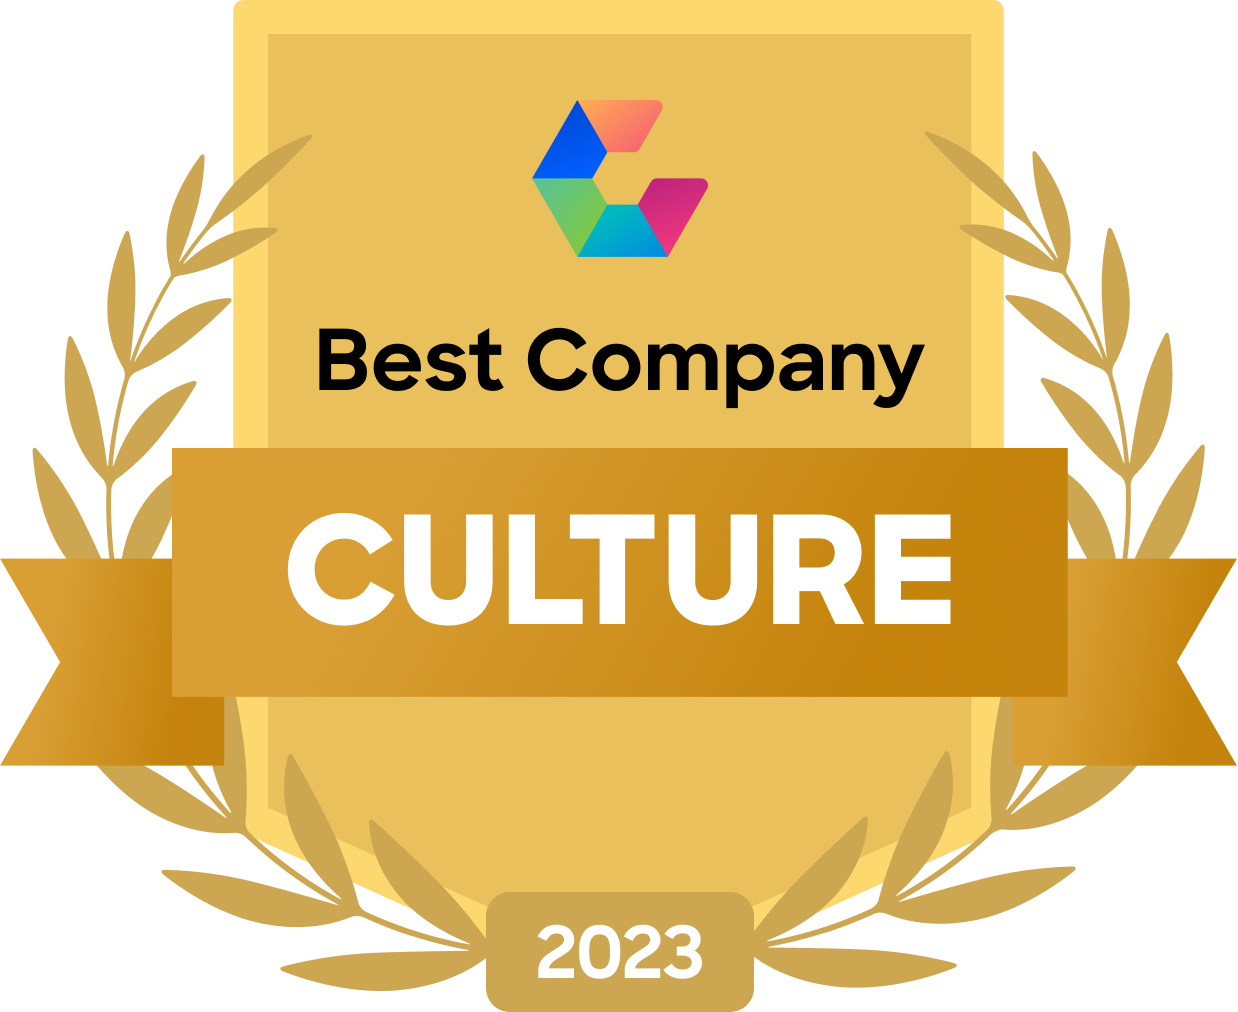 Motivosity Wins Comparably Award for Best Company Culture